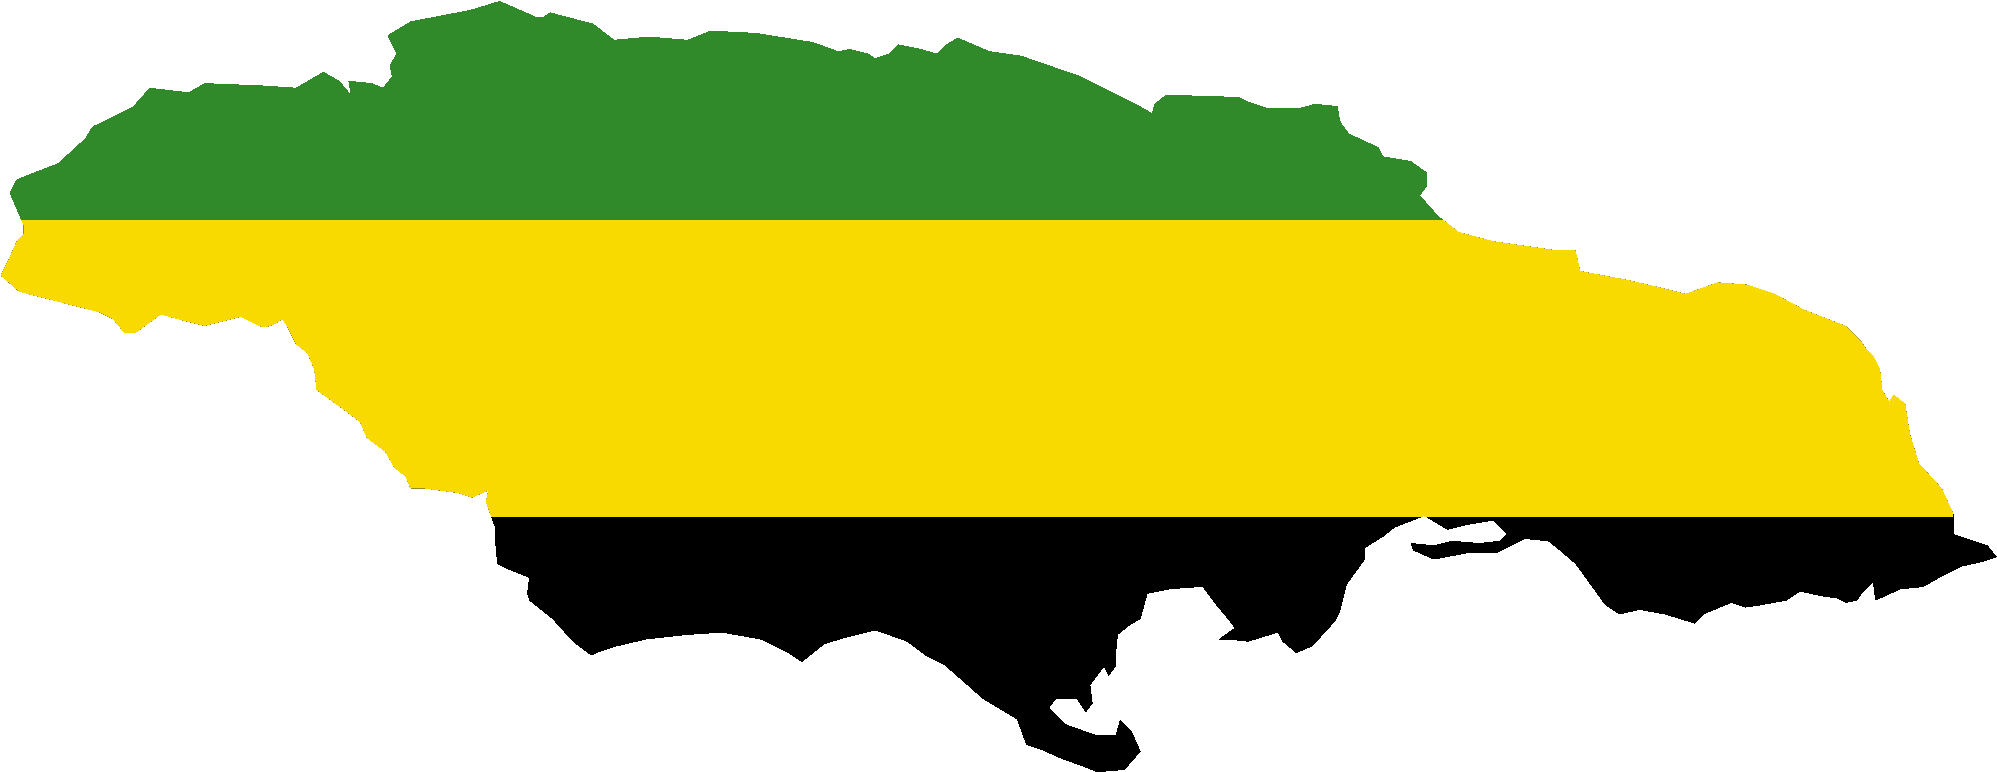 Png V - Jamaican Map And Flag (2100x900)